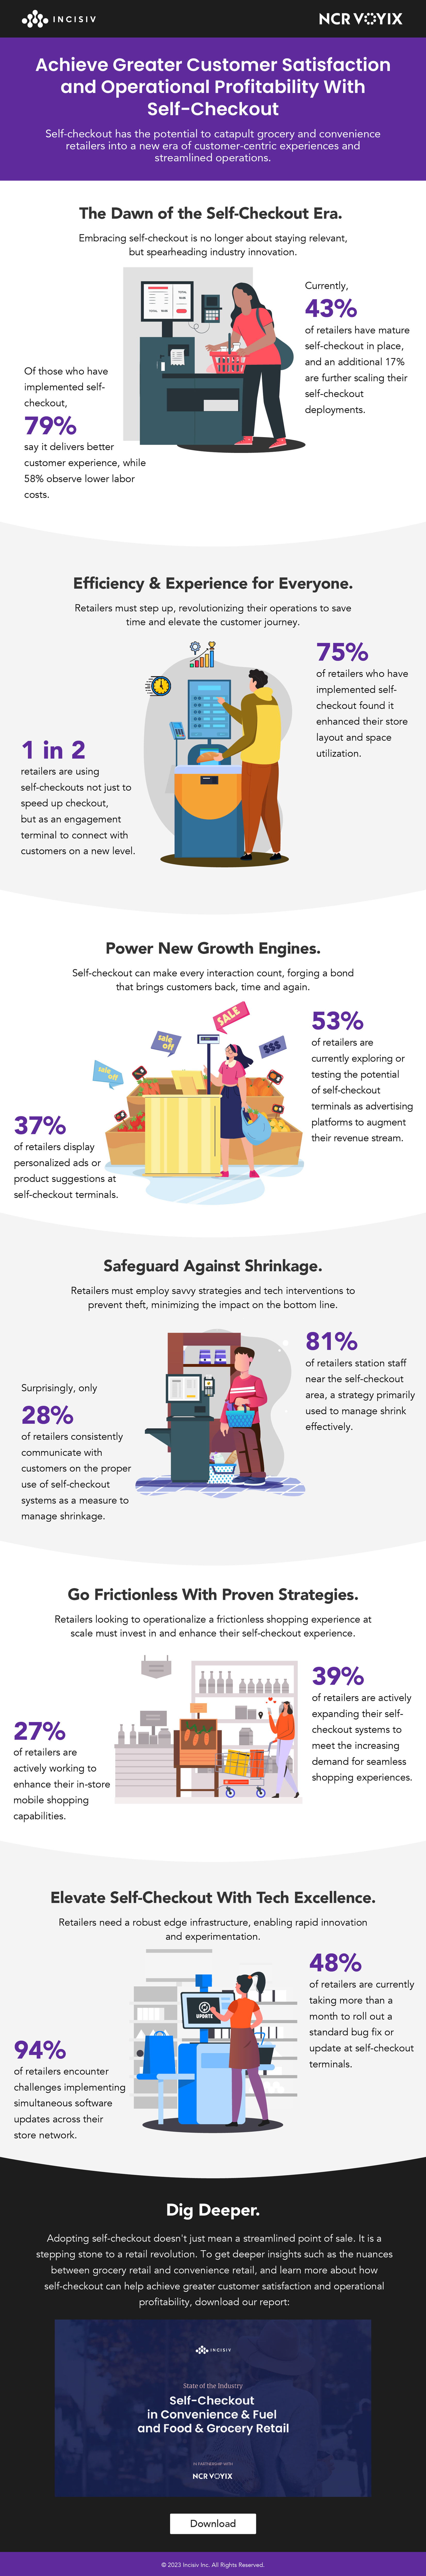 Achieve Greater Customer Satisfaction and Operational Profitability With Self-Checkout, Infographic